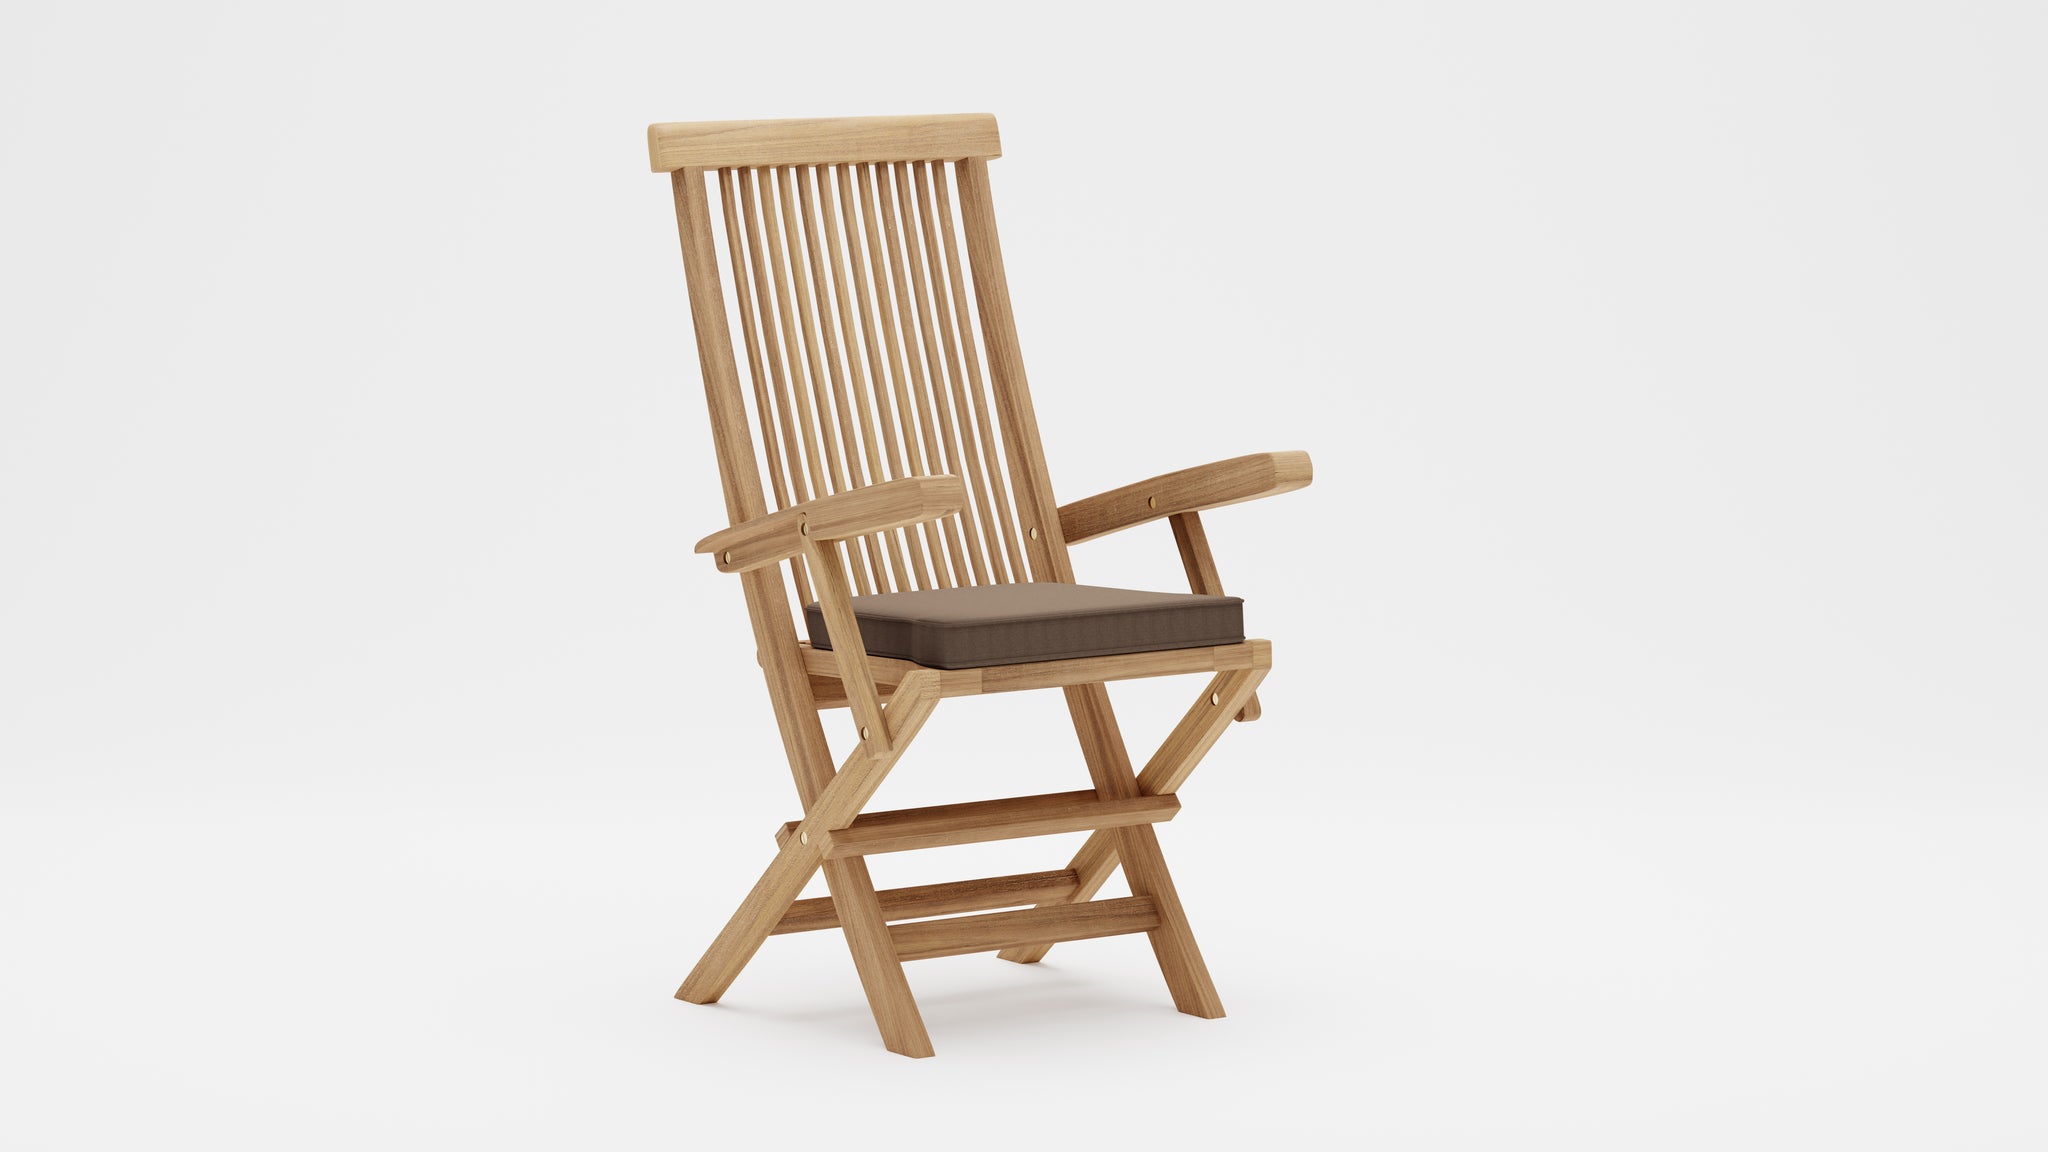 Lincoln Teak Folding Carver Chair with Taupe Cushion